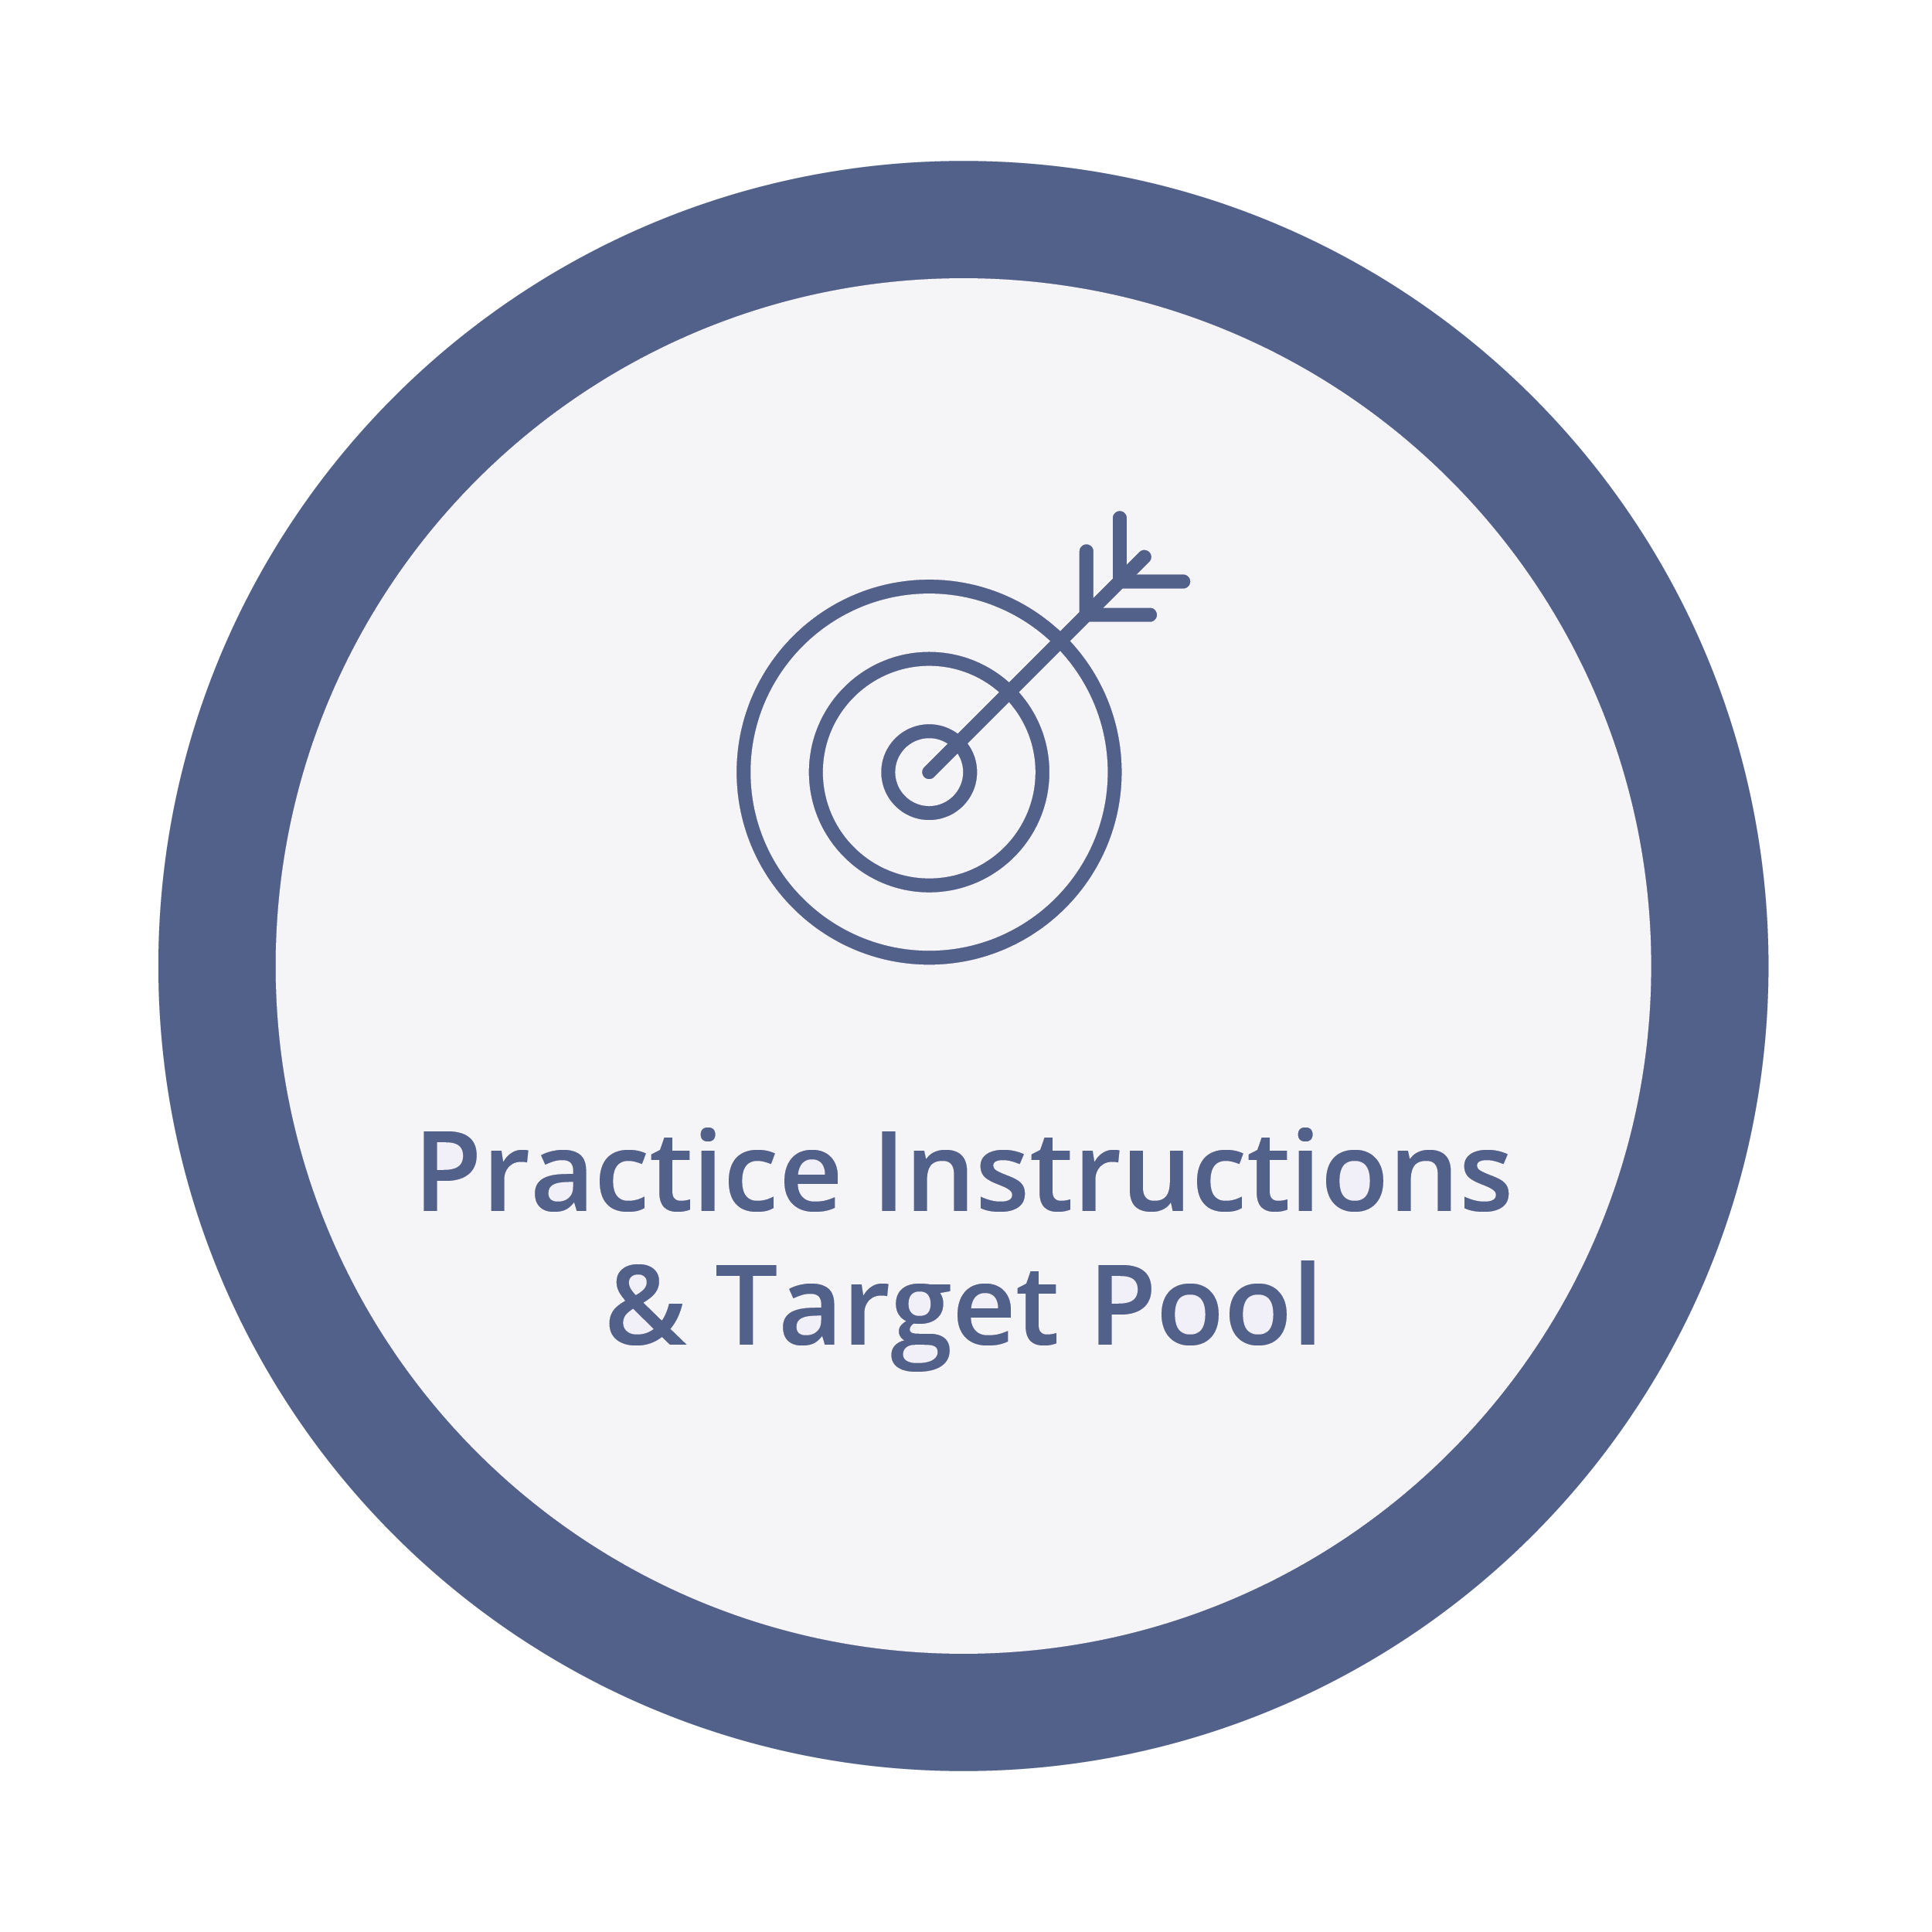 View Practice Instructions & Target Pool